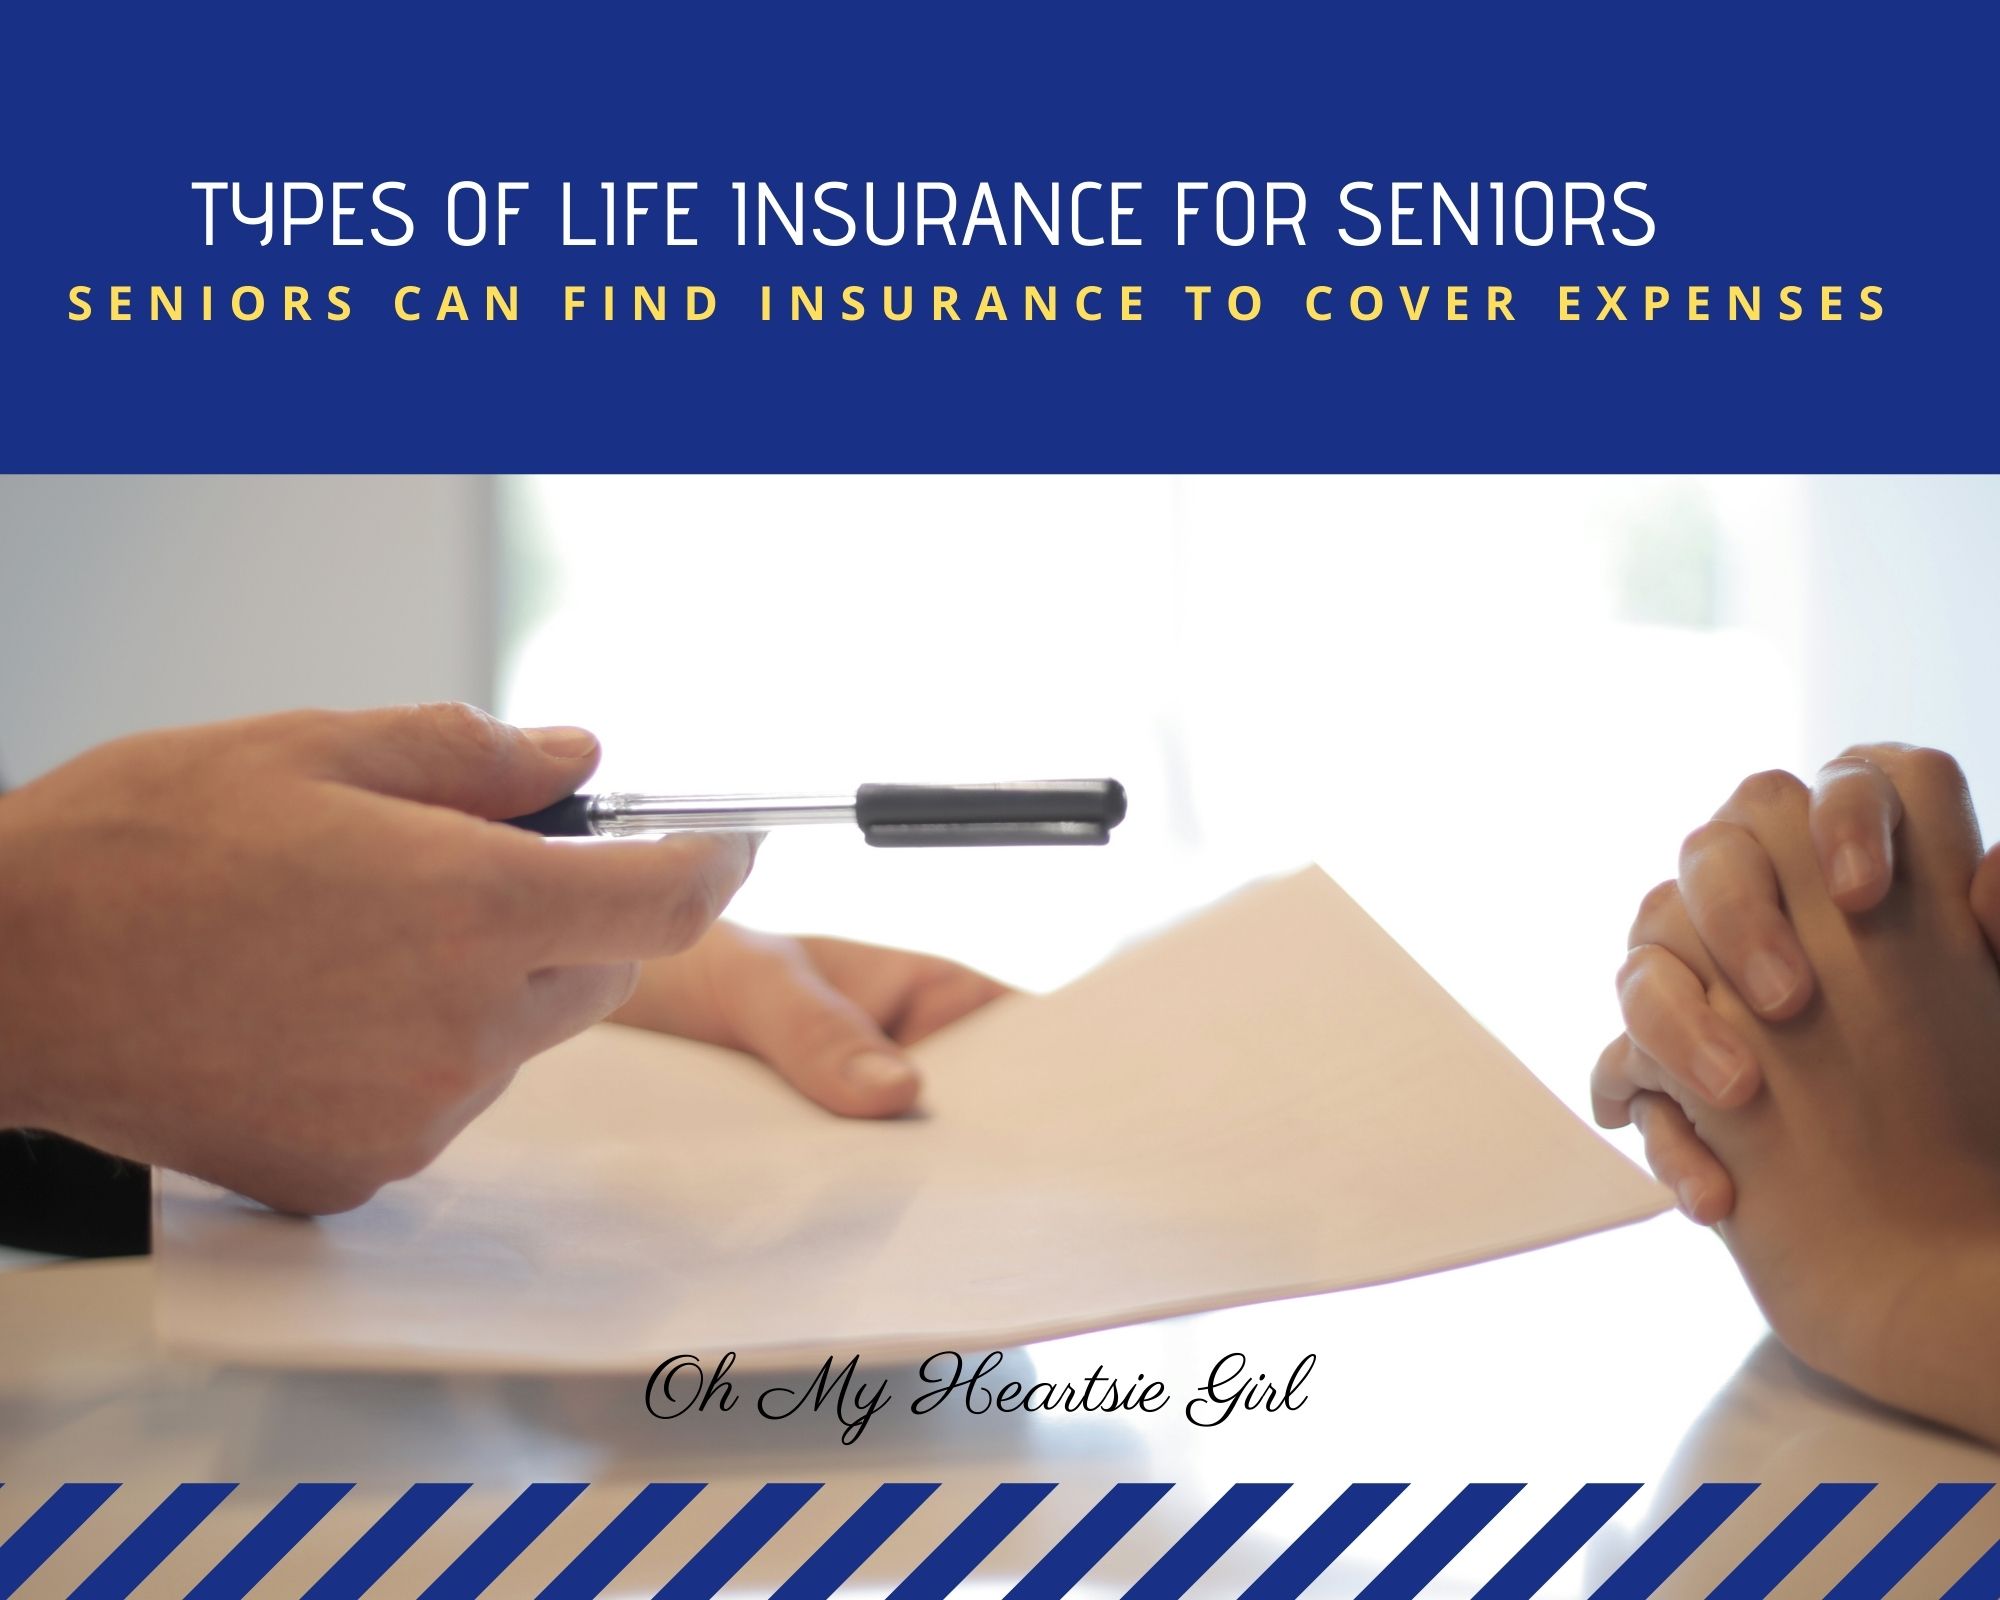  Types-of-Affordable-Life-Insurance-For-Seniors-to-pay-for-expenses